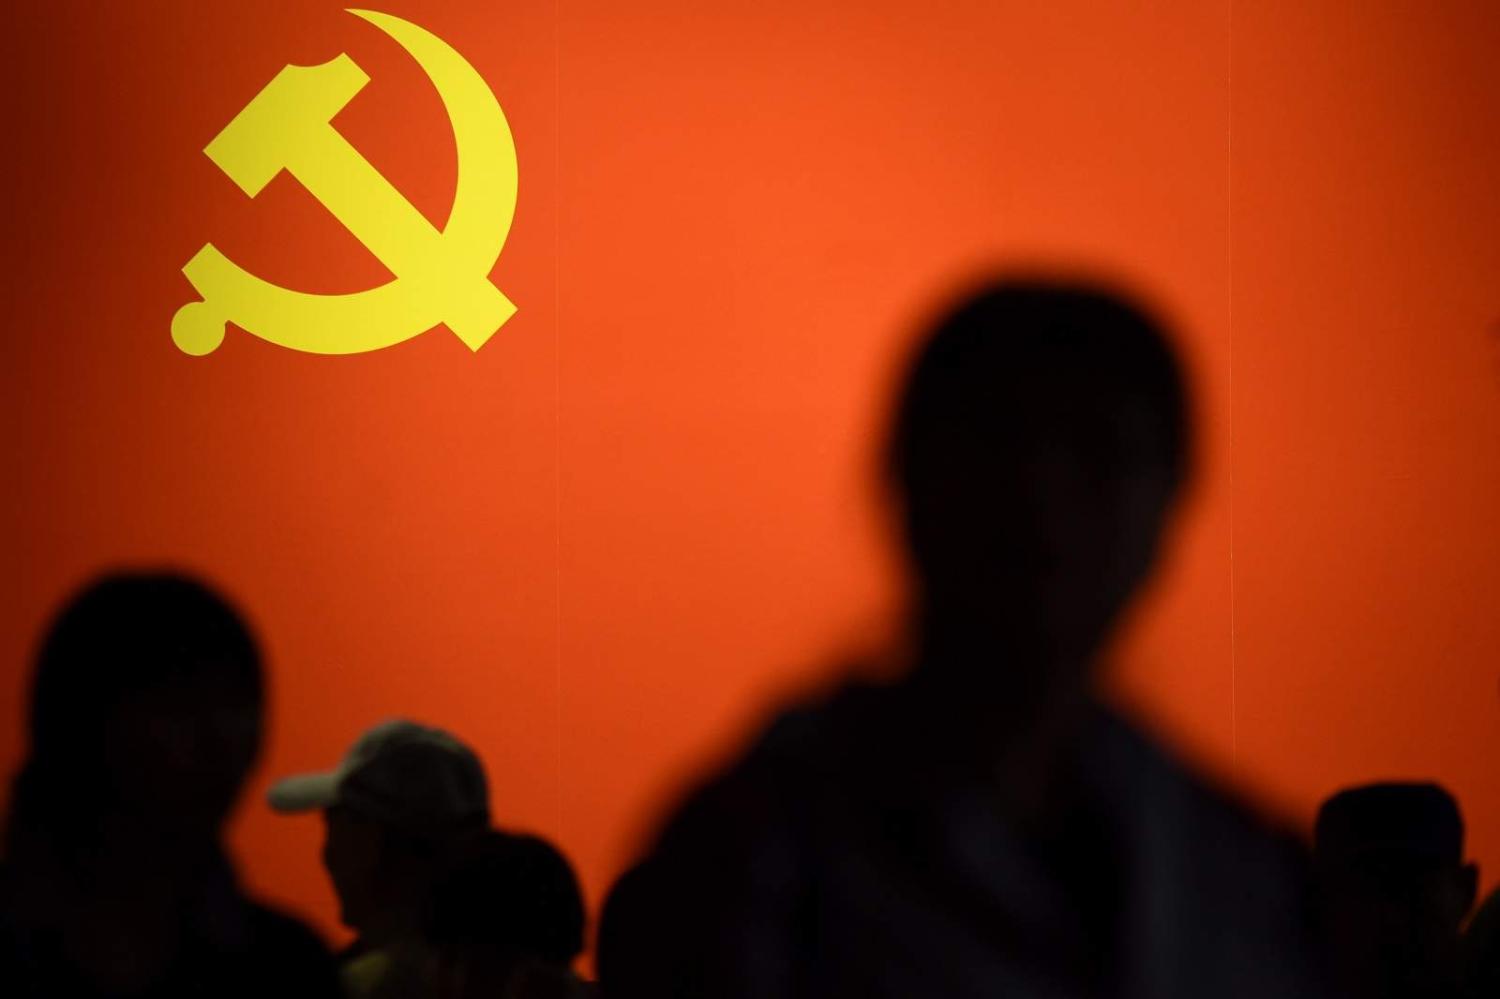 China, unlike the Soviet Union in its heyday, does not expect the world to adopt its communist model (Wang Zhao/AFP via Getty Images)